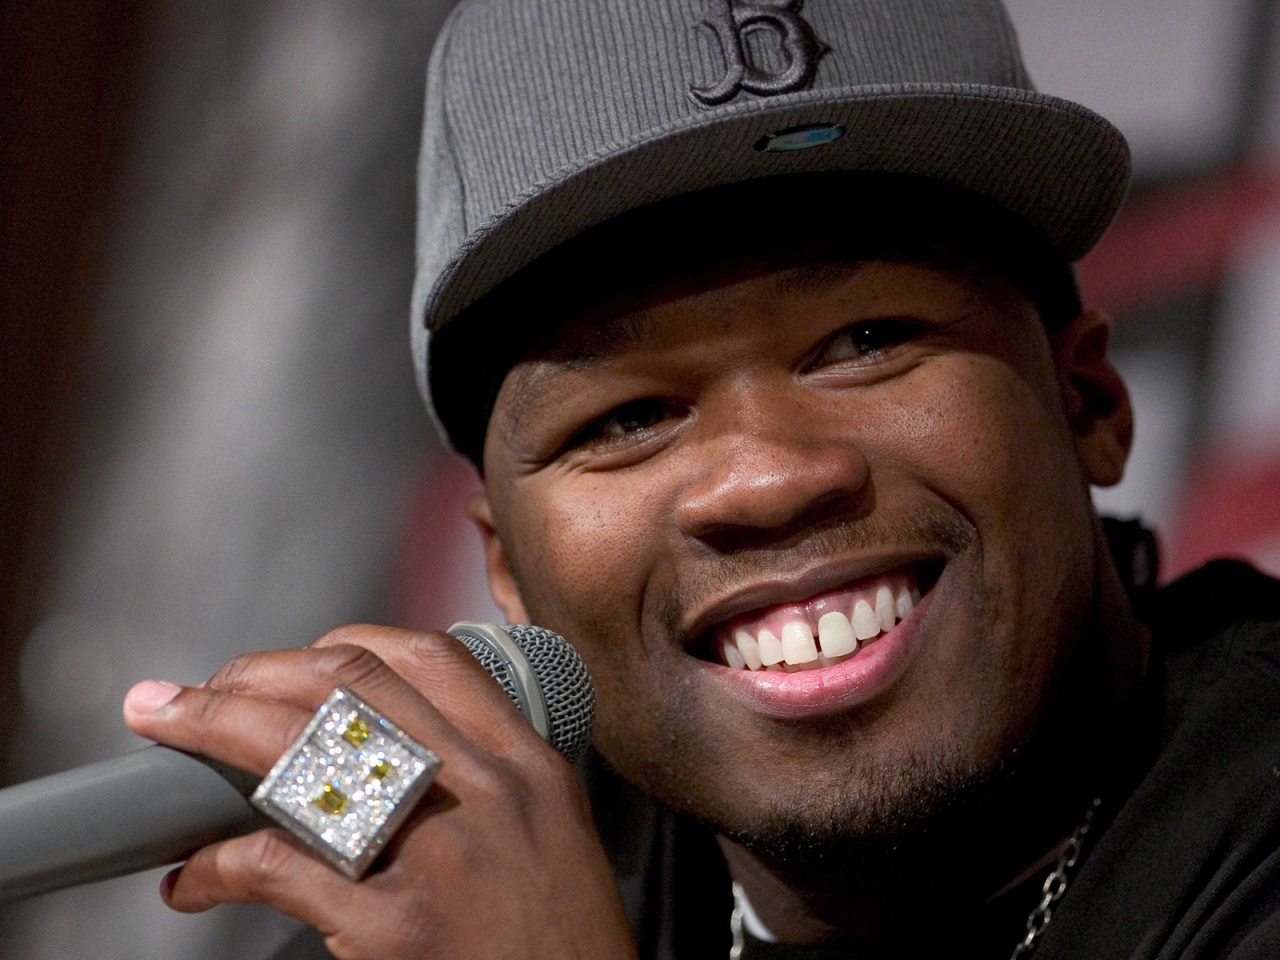 50 Cent Smile for 1280 x 960 resolution